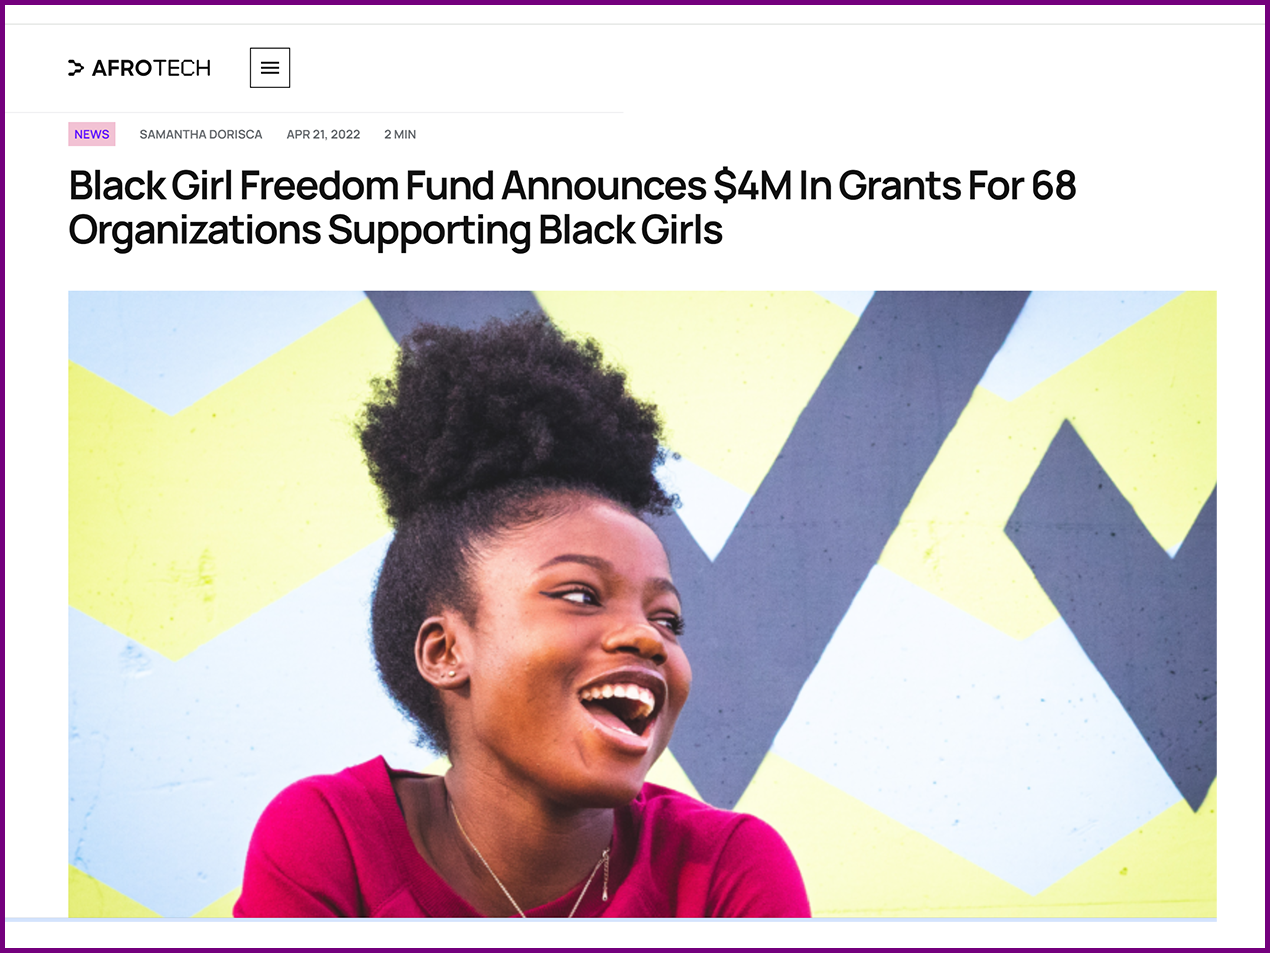 Afrotech feature: Black Girl Freedom Fund Announces $4M In Grants For 68 Organizations Supporting Black Girls